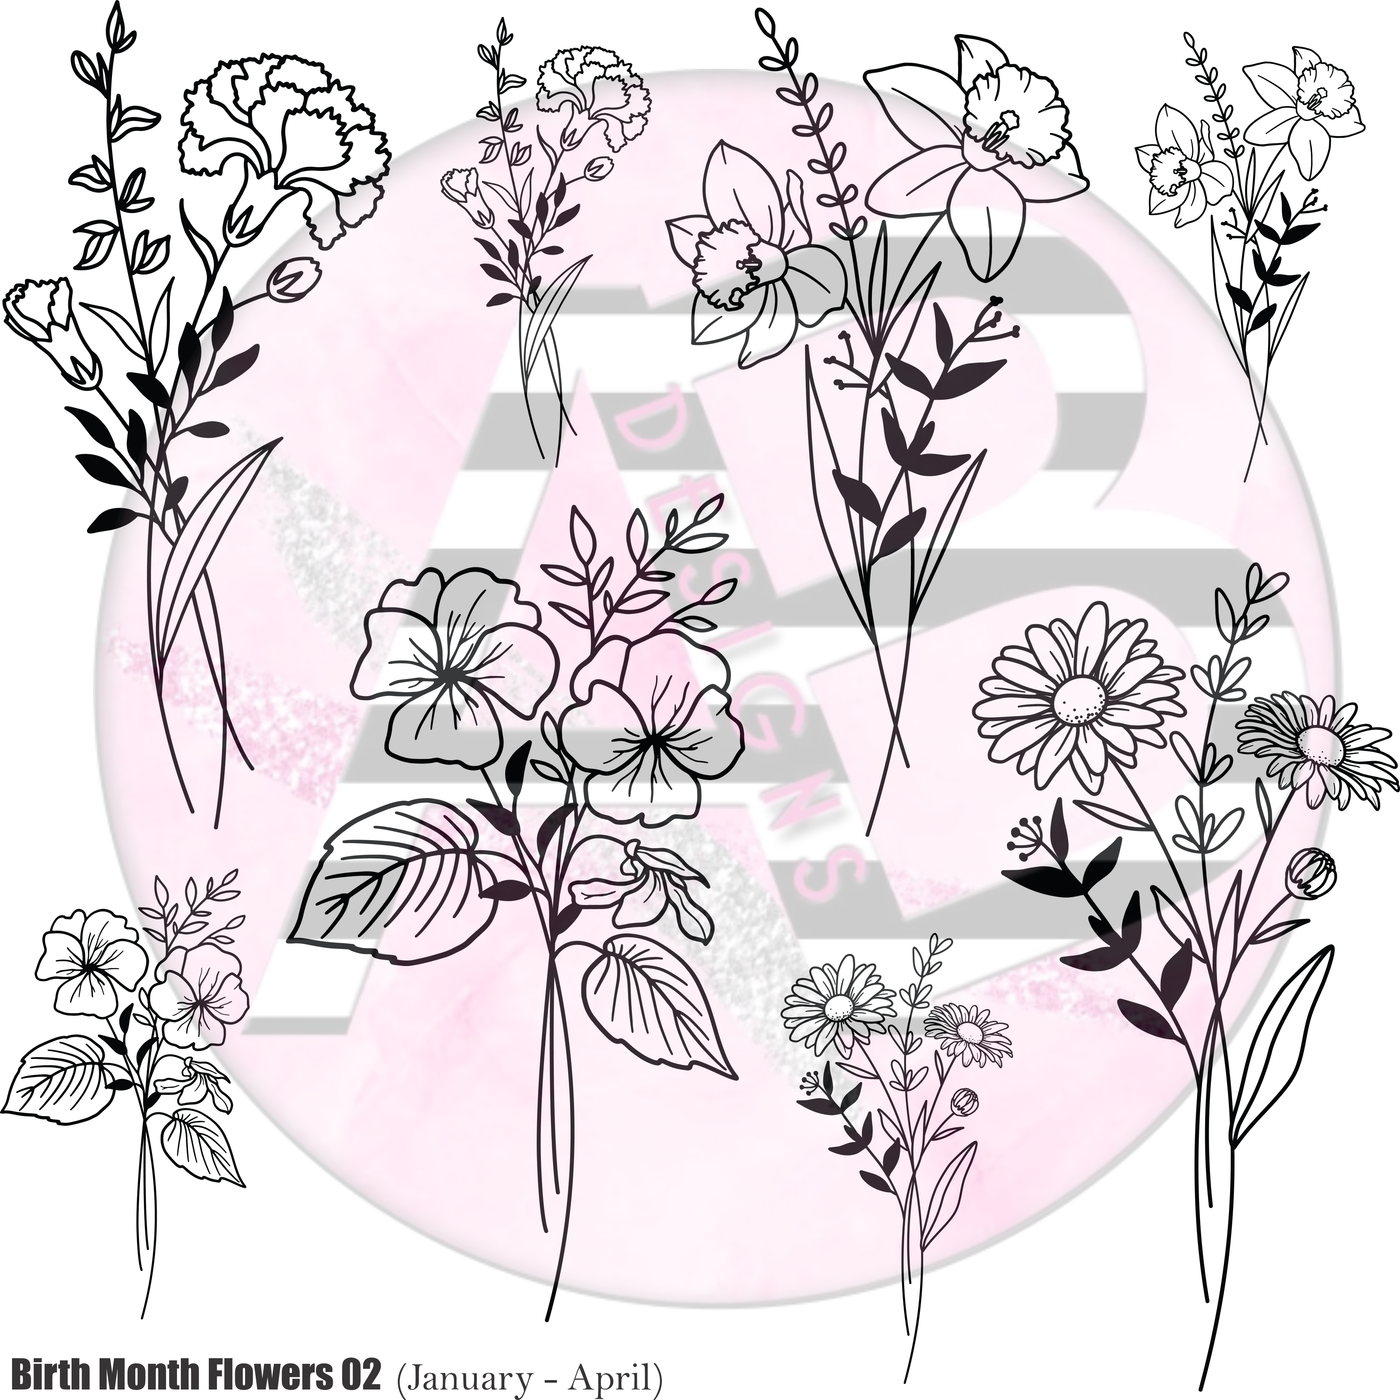 Birth Month Flowers 02 (January - April) Full Sheet 12 x 12 Clear Cast Decal